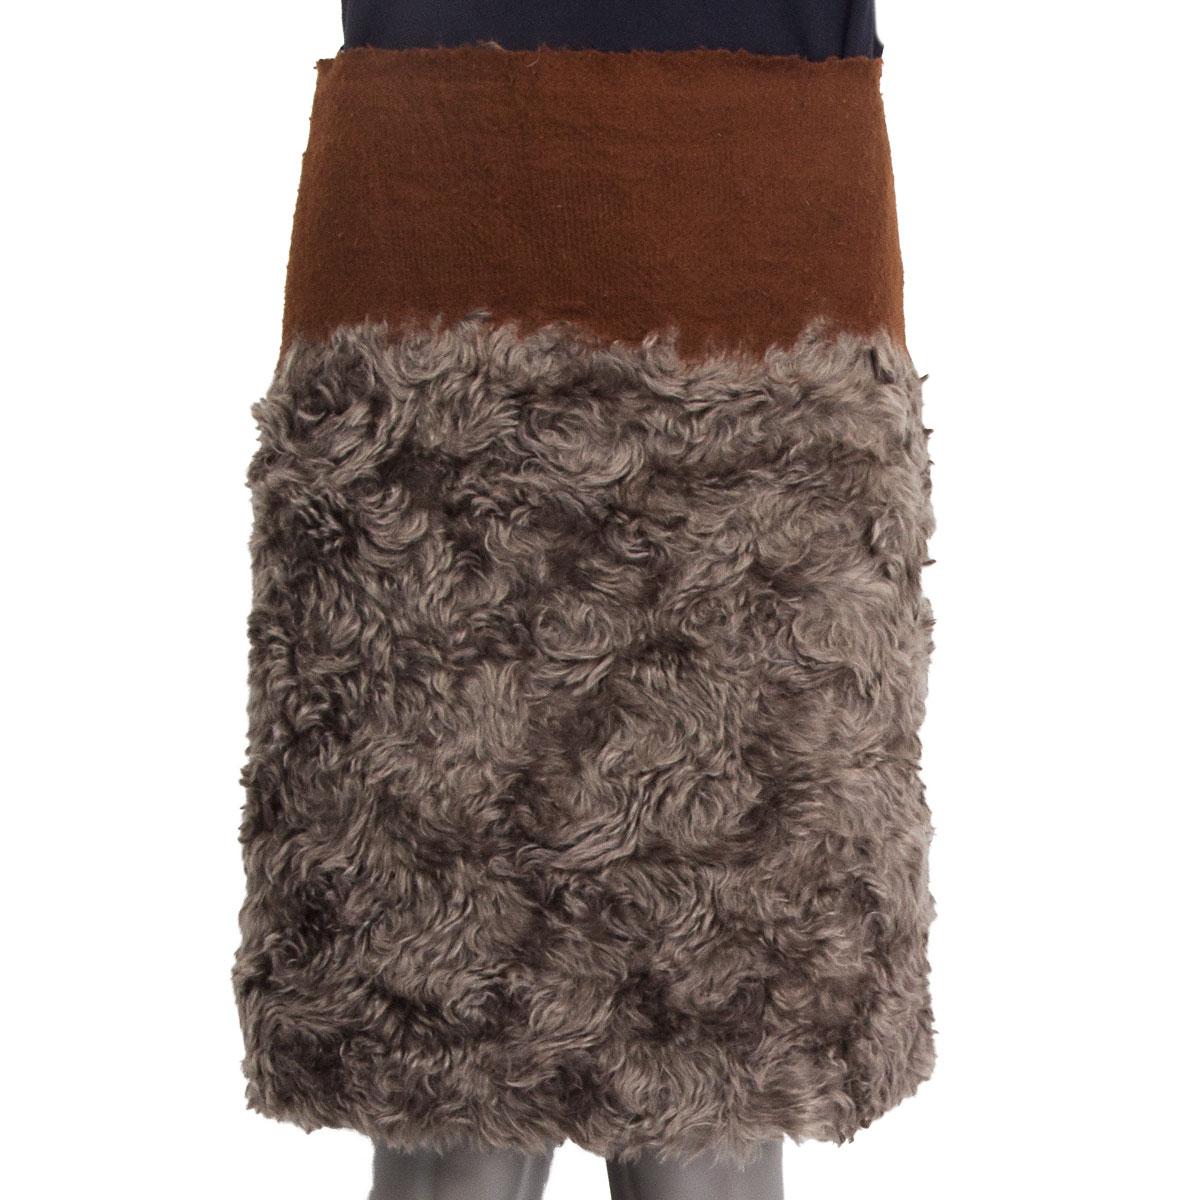 100% authentic Prada knee-length skirt in brown and fluffy grey mohair (69%) and cotton (31%). Lined in grey viscose. Opens with a zipper on the side. Has been worn and is in excellent condition. 

Tag Size 38
Size XS
Waist 78cm (30.4in)
Hips 87cm